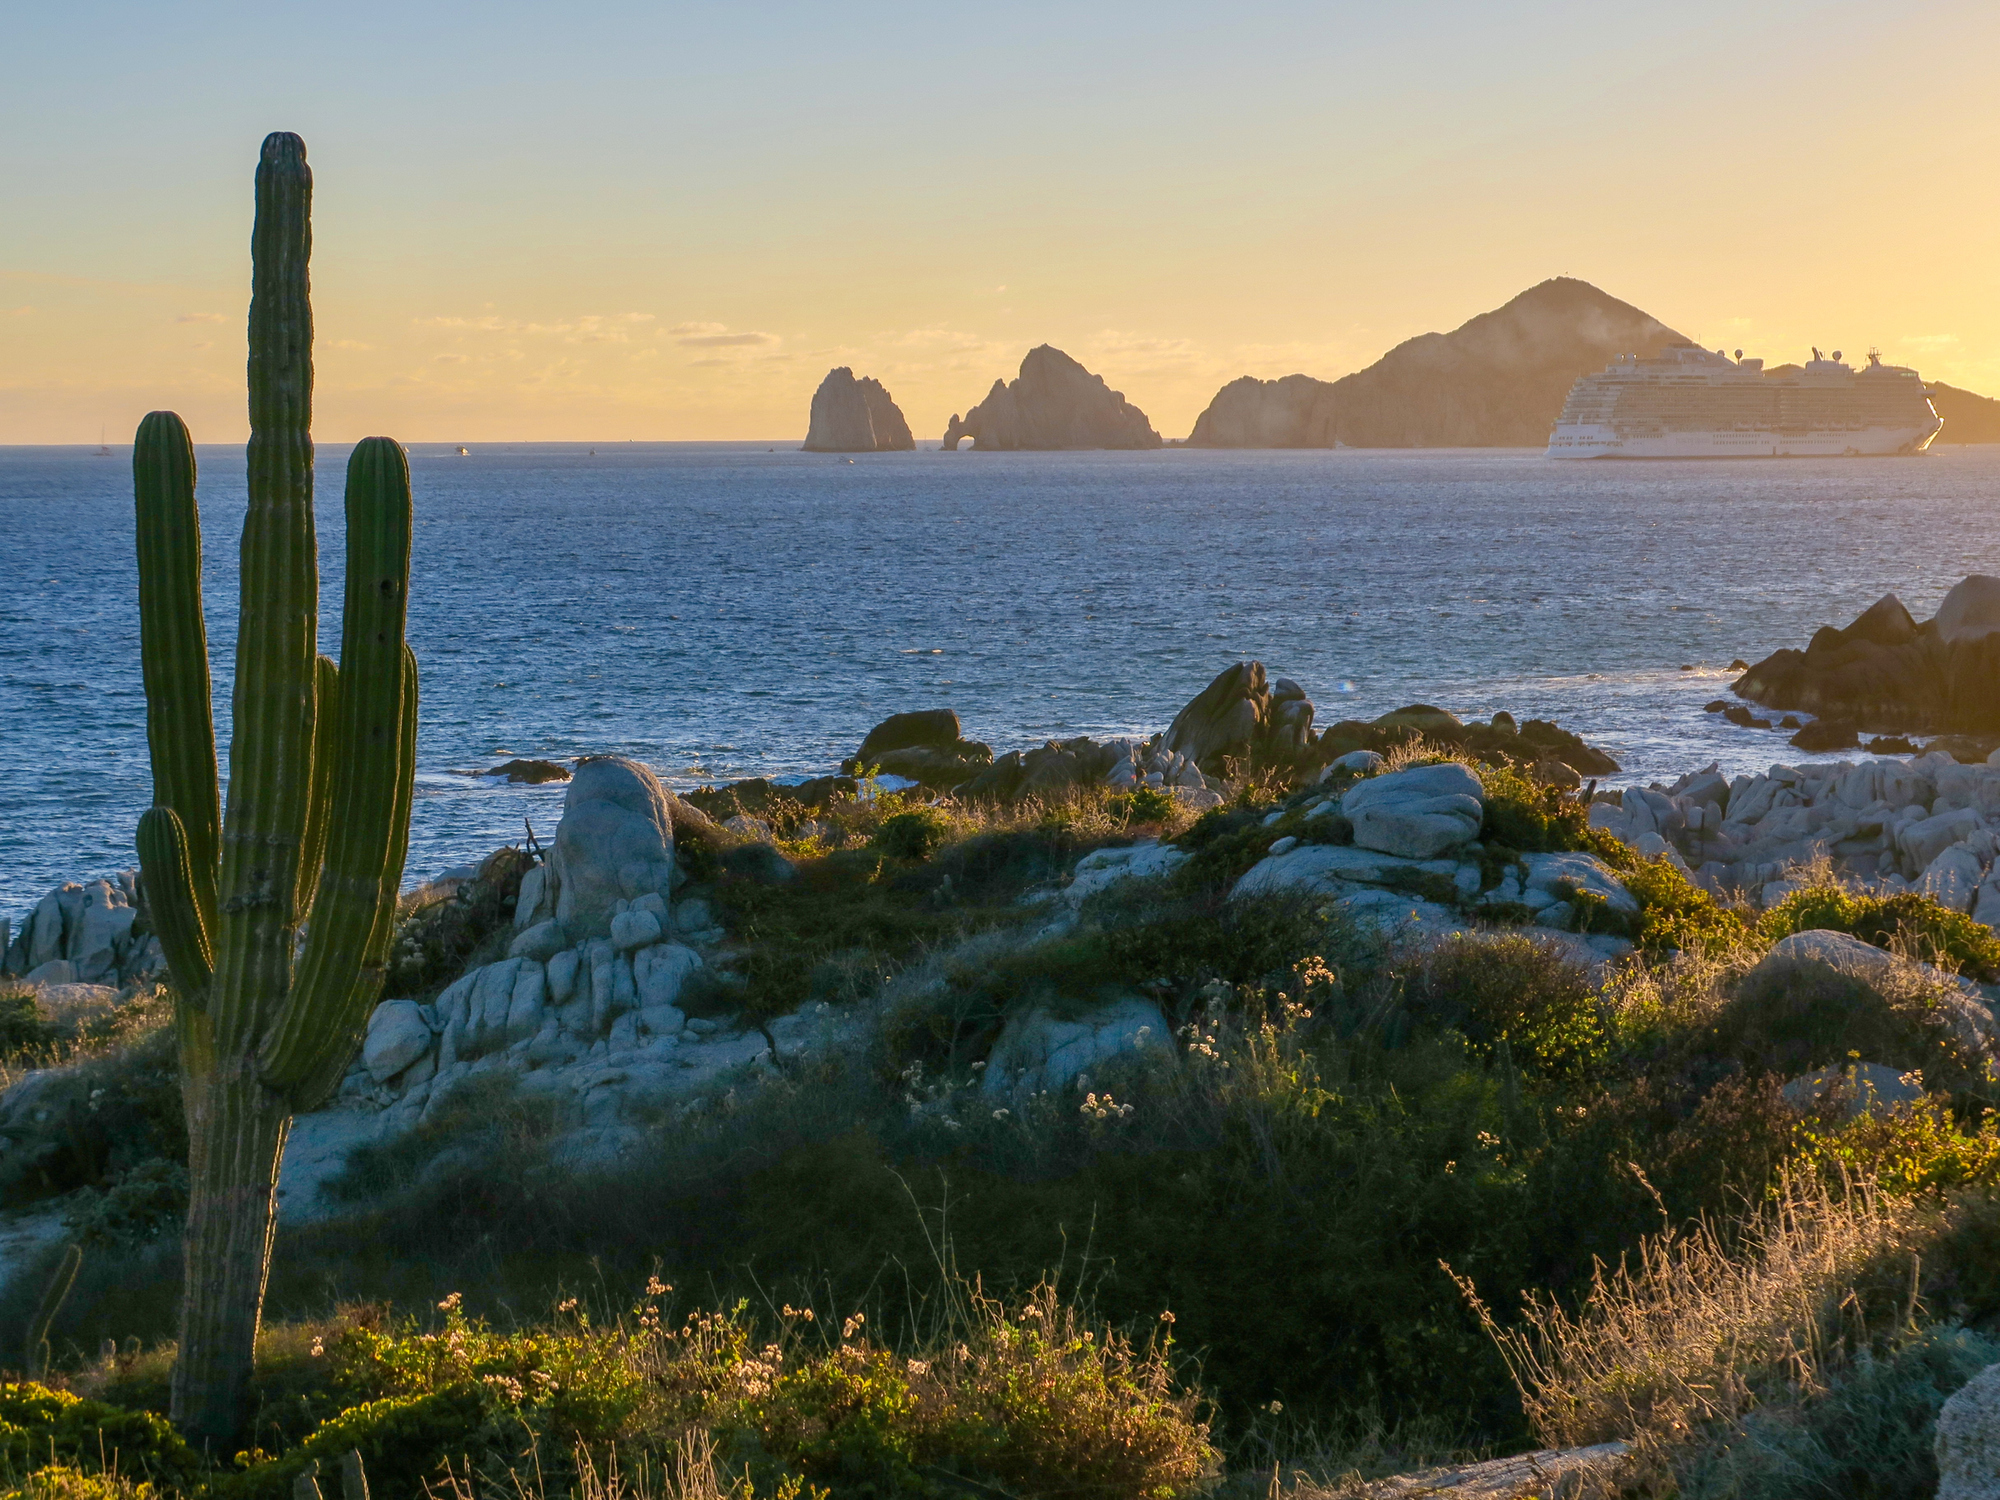 Cactus in the foreground and the famous Cabo arches in the background behind the sea